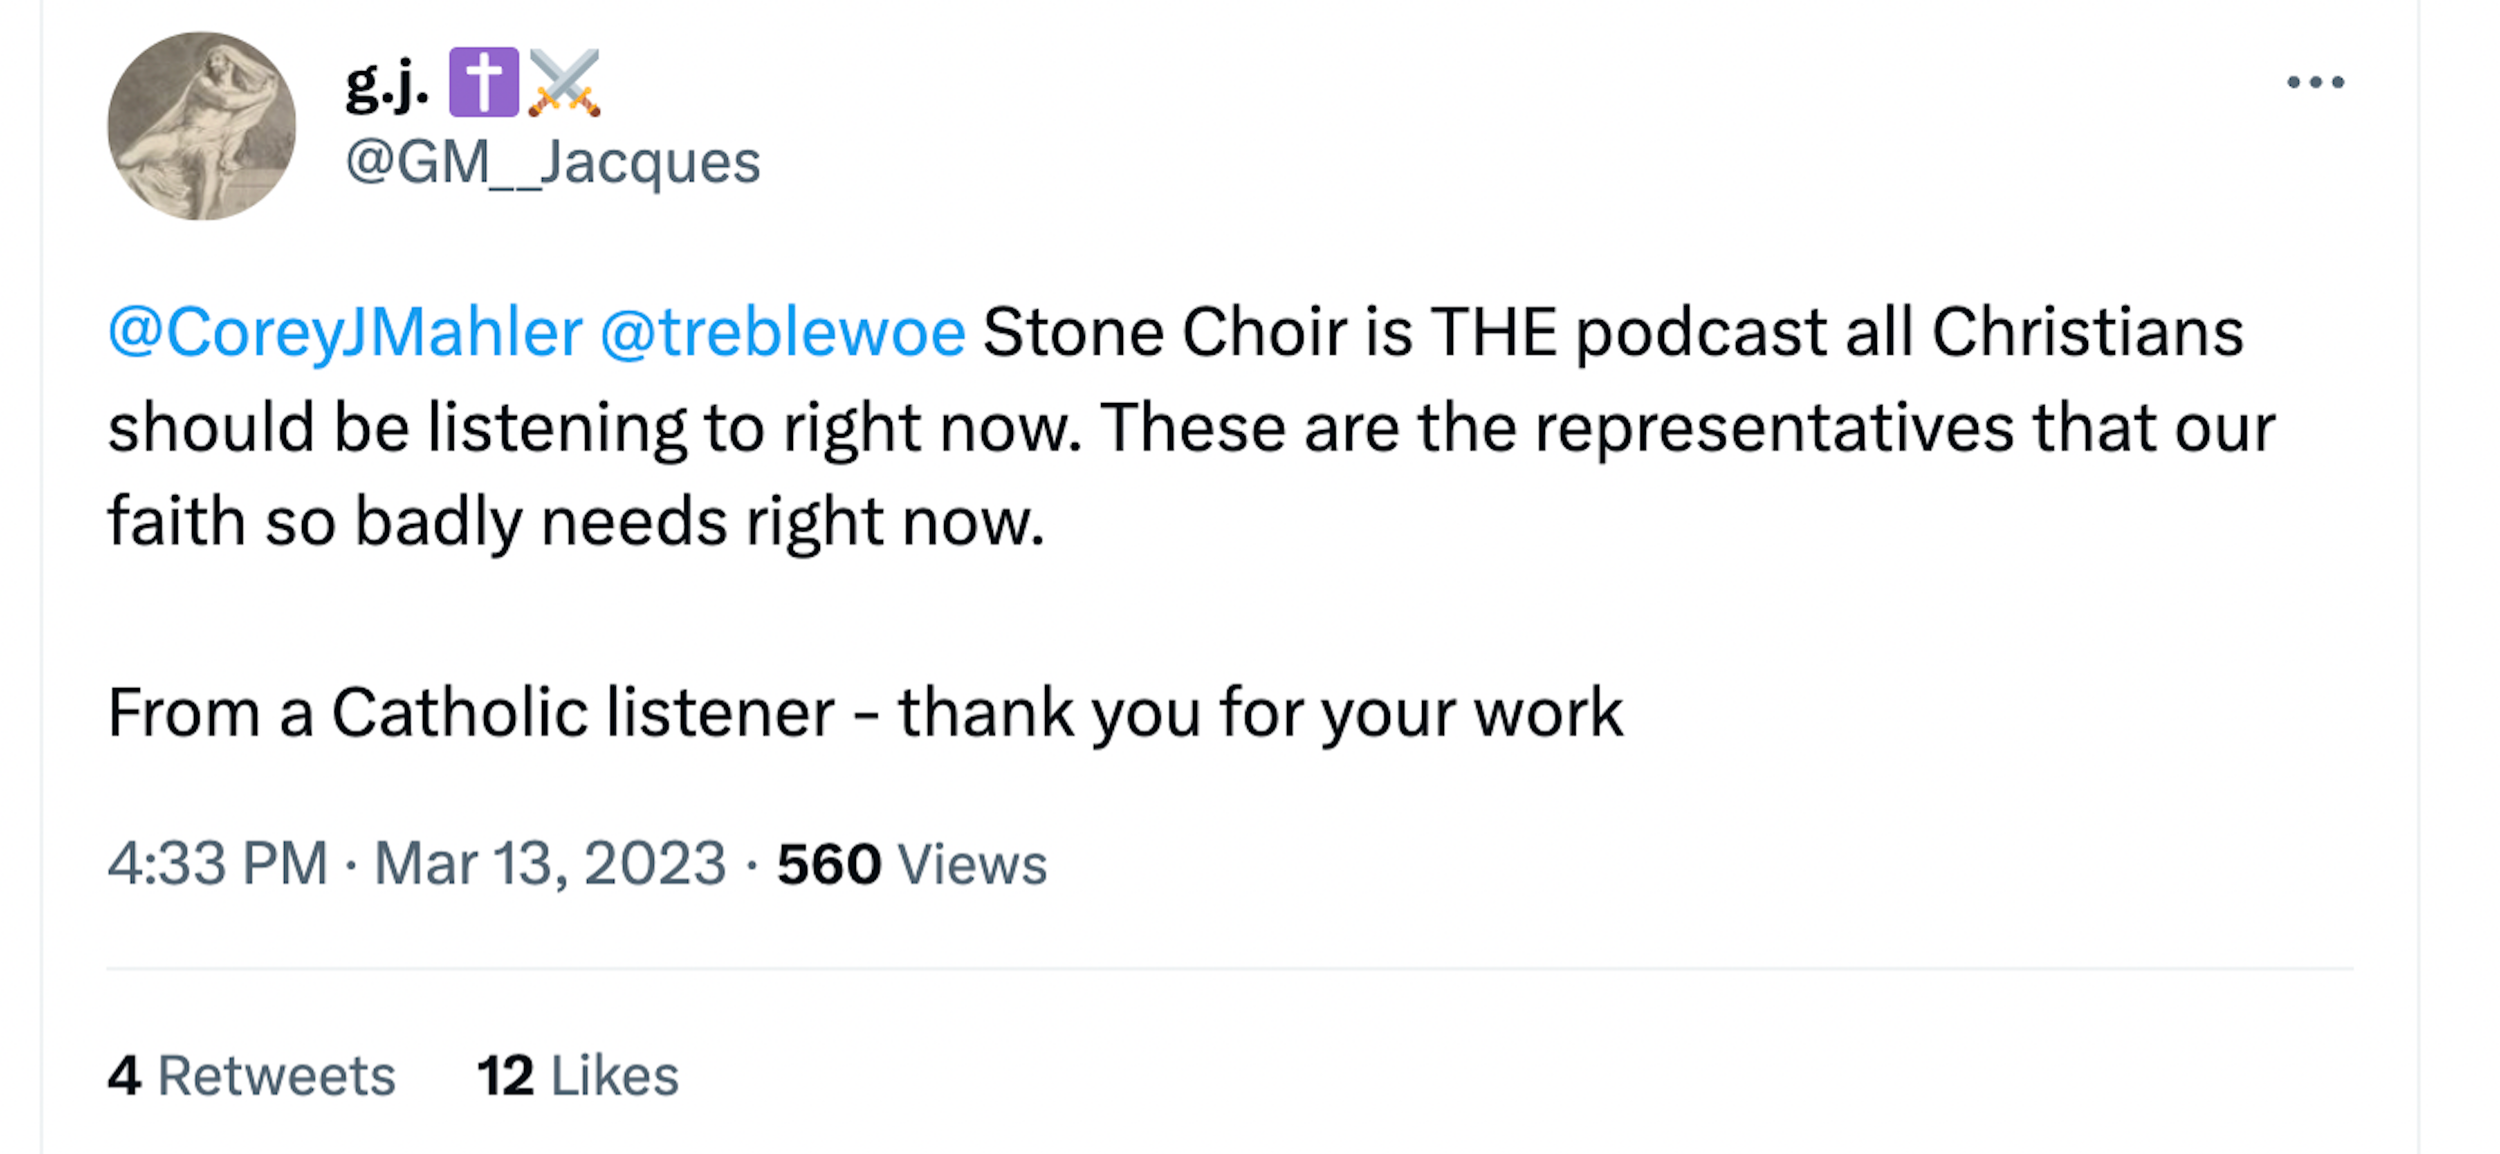 Twitter user "g.i.": "@CoreyJMahler @treblewoe Stone Choir is THE podcast all Christians should be listeing to right now. These are the representatives that our faith needs so badly right now. From a Catholic listener - thank you for your work"